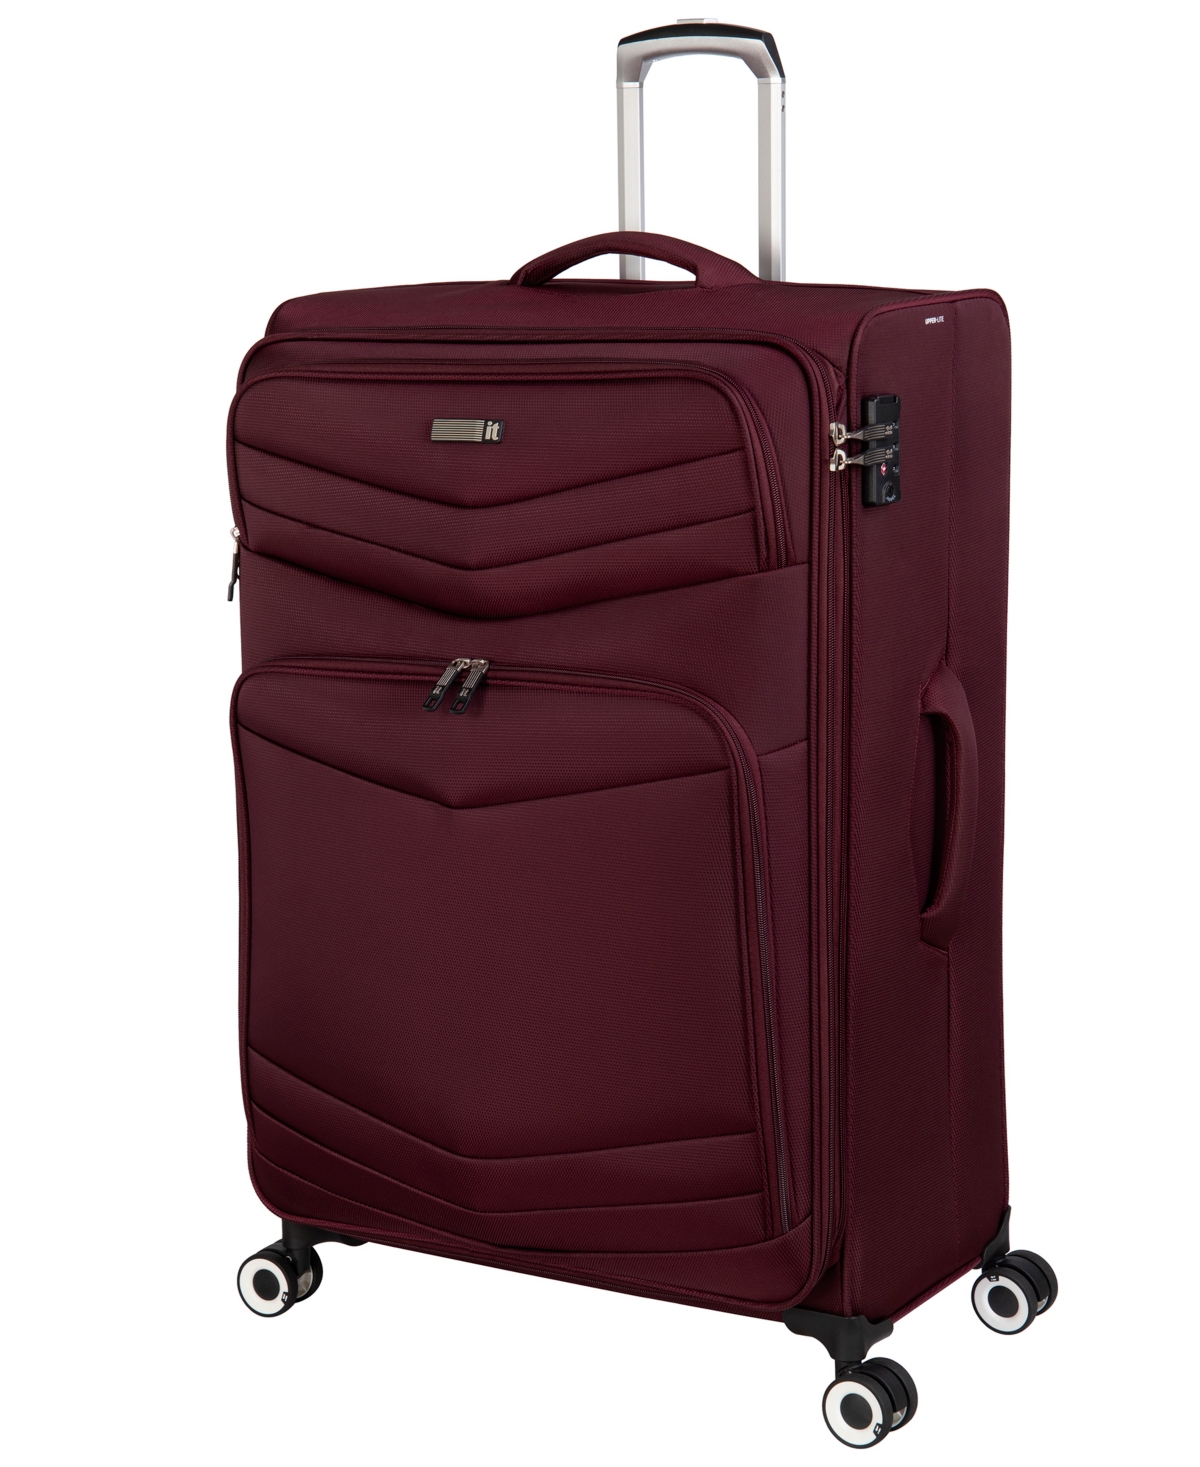 It Luggage Intrepid 29" Large 8-wheel Expandable Luggage Case In Dark Red